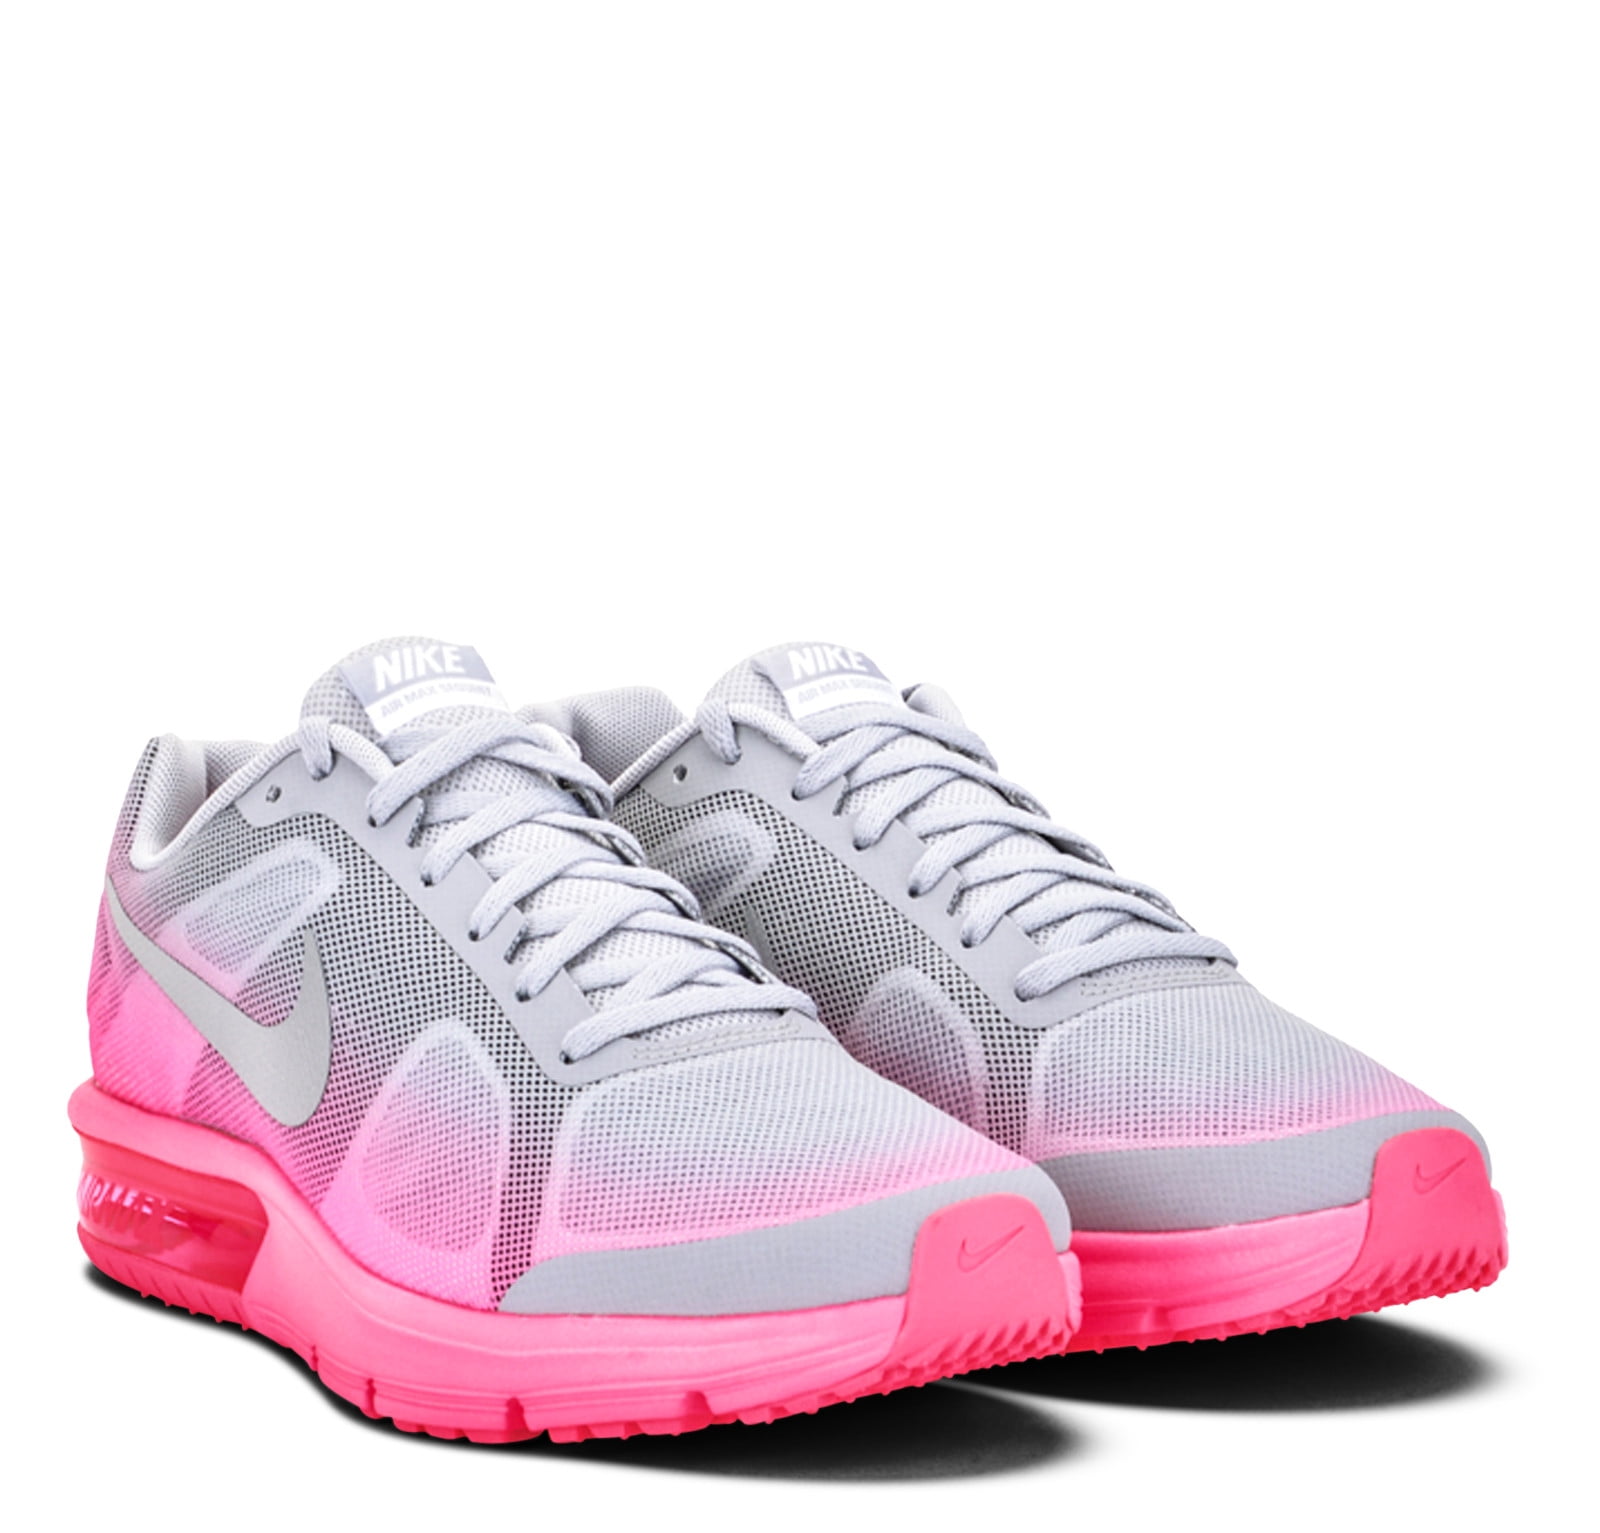 NIKE AIR MAX SEQUENT Girls sneakers (GS) 724984-002